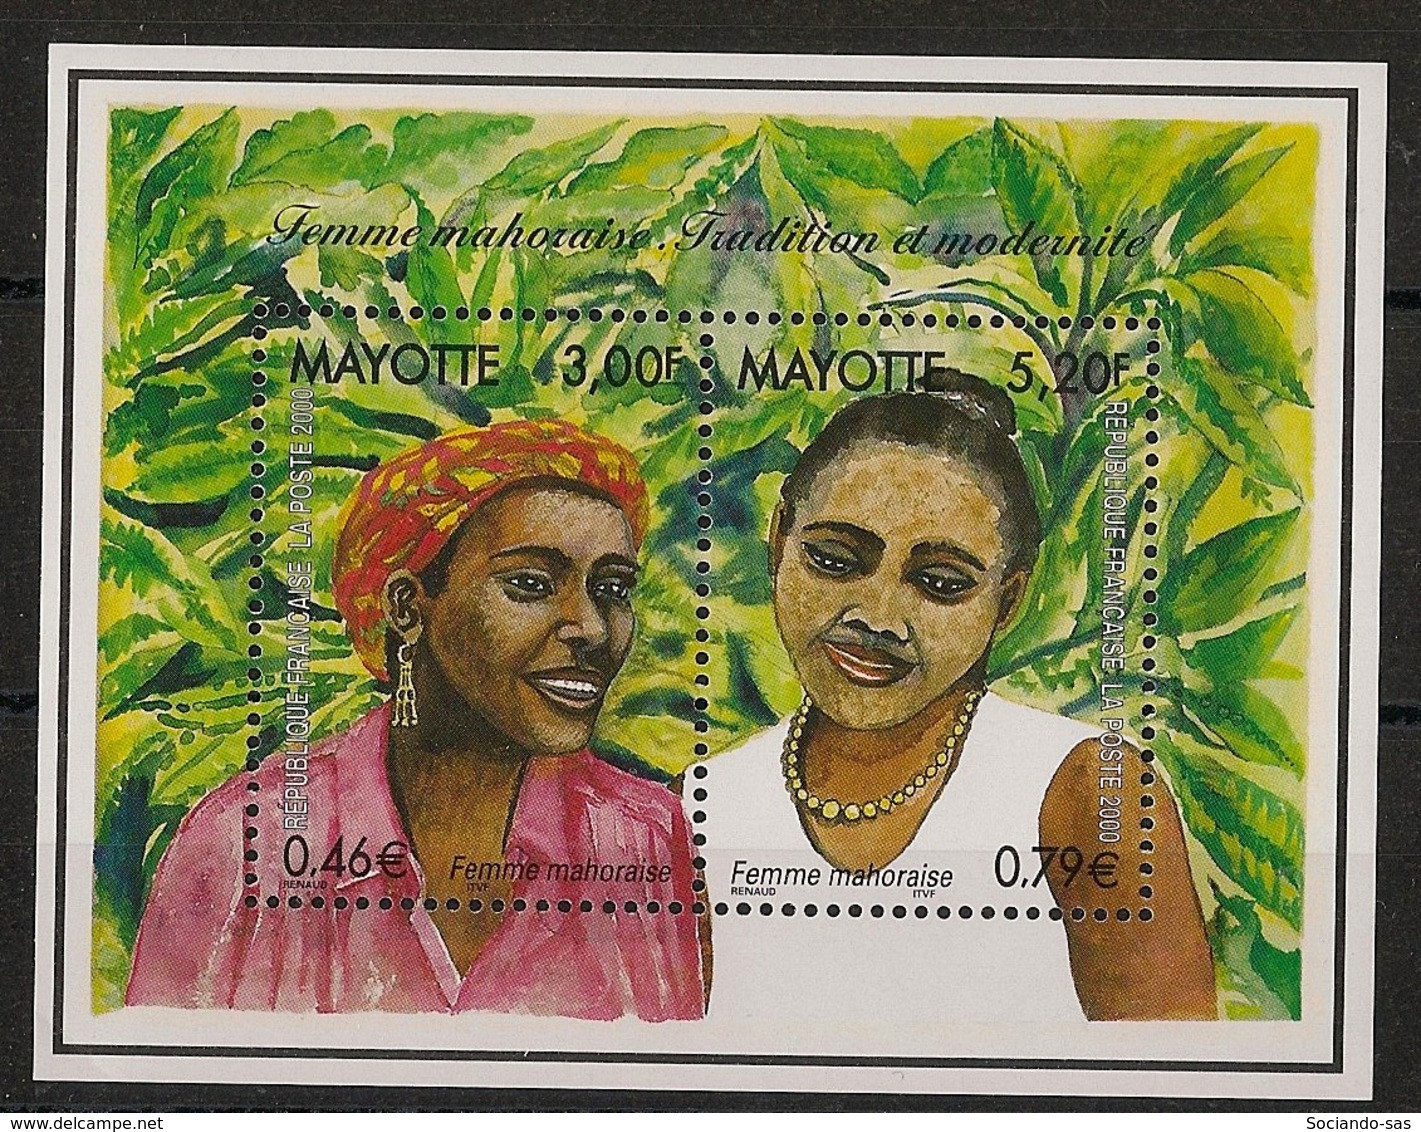 Mayotte - 2000 - Bloc Feuillet N°Yv. 3 - Femme Mahoraise - Neuf Luxe ** / MNH / Postfrisch - Hojas Y Bloques